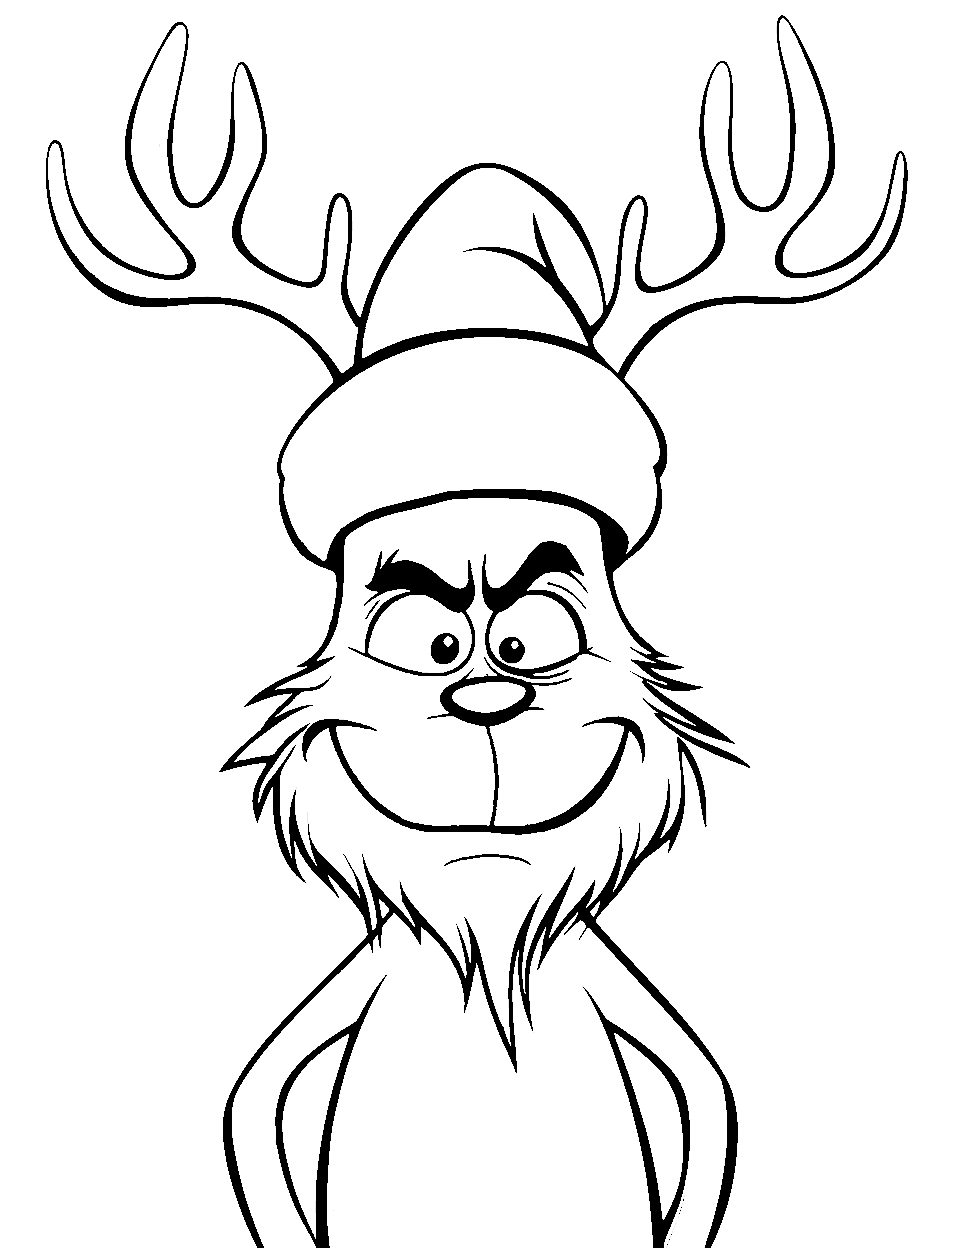 35 Grinch Coloring Pages: Free Printable Sheets